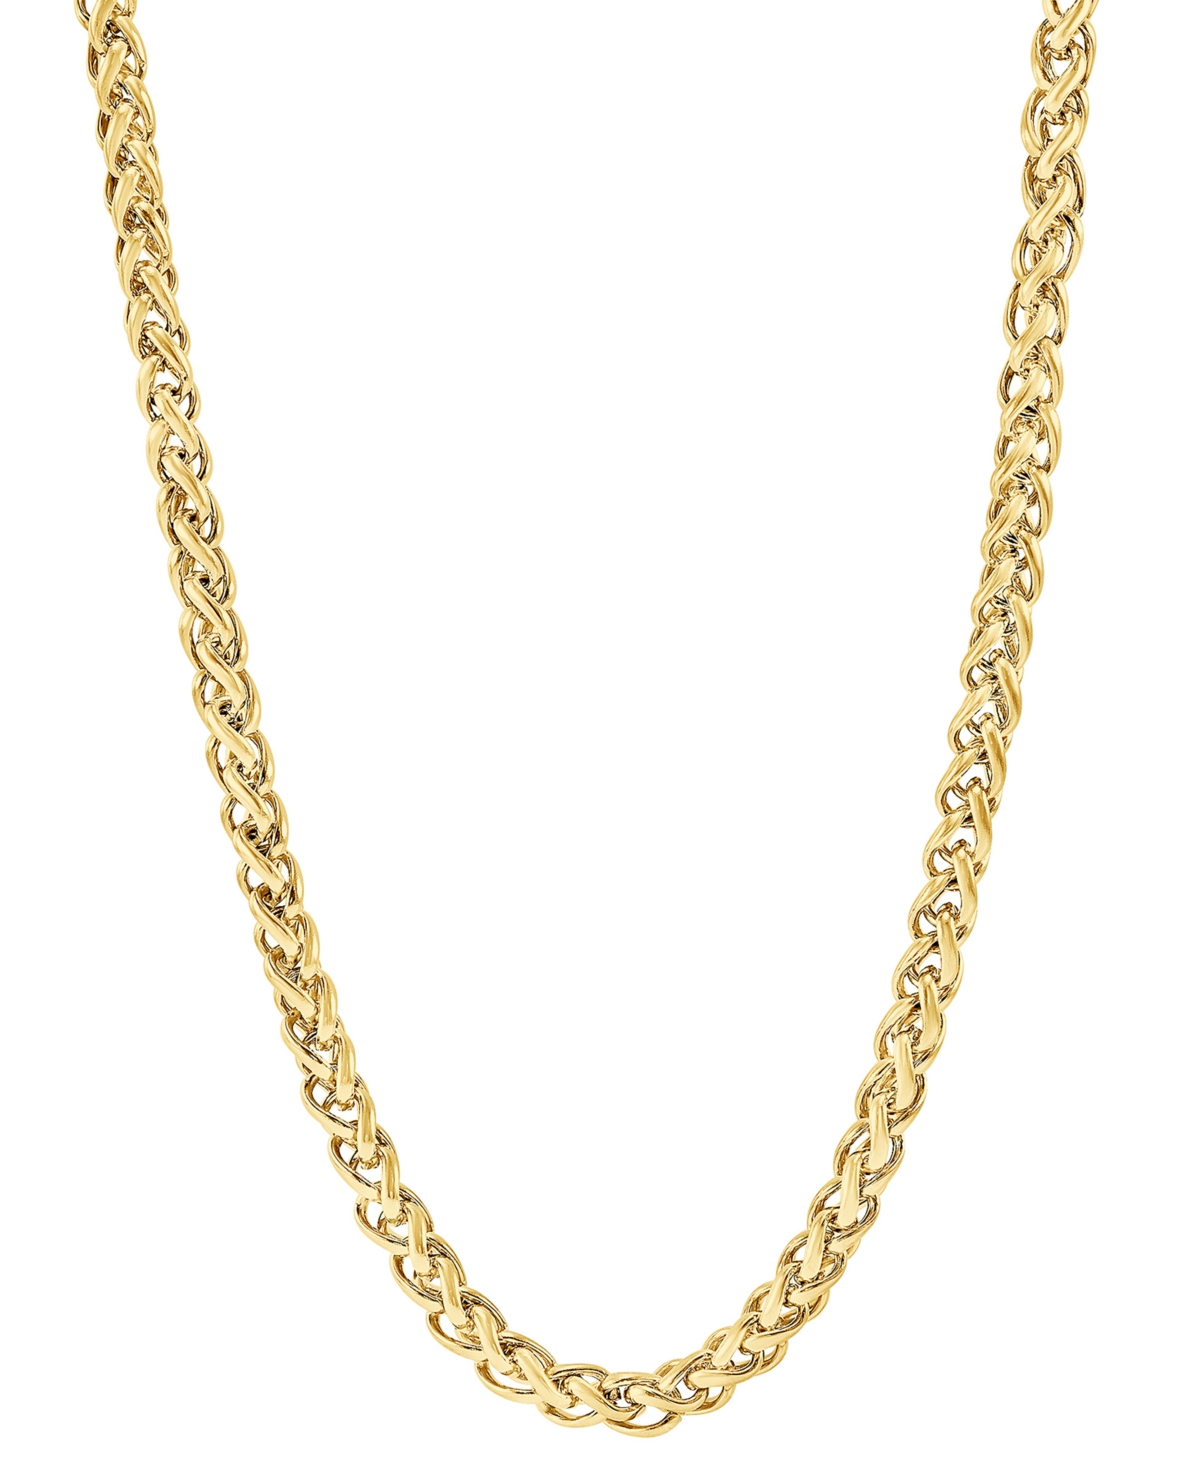 Men's Wheat Link 24" Chain Necklace in Stainless Steel - Black